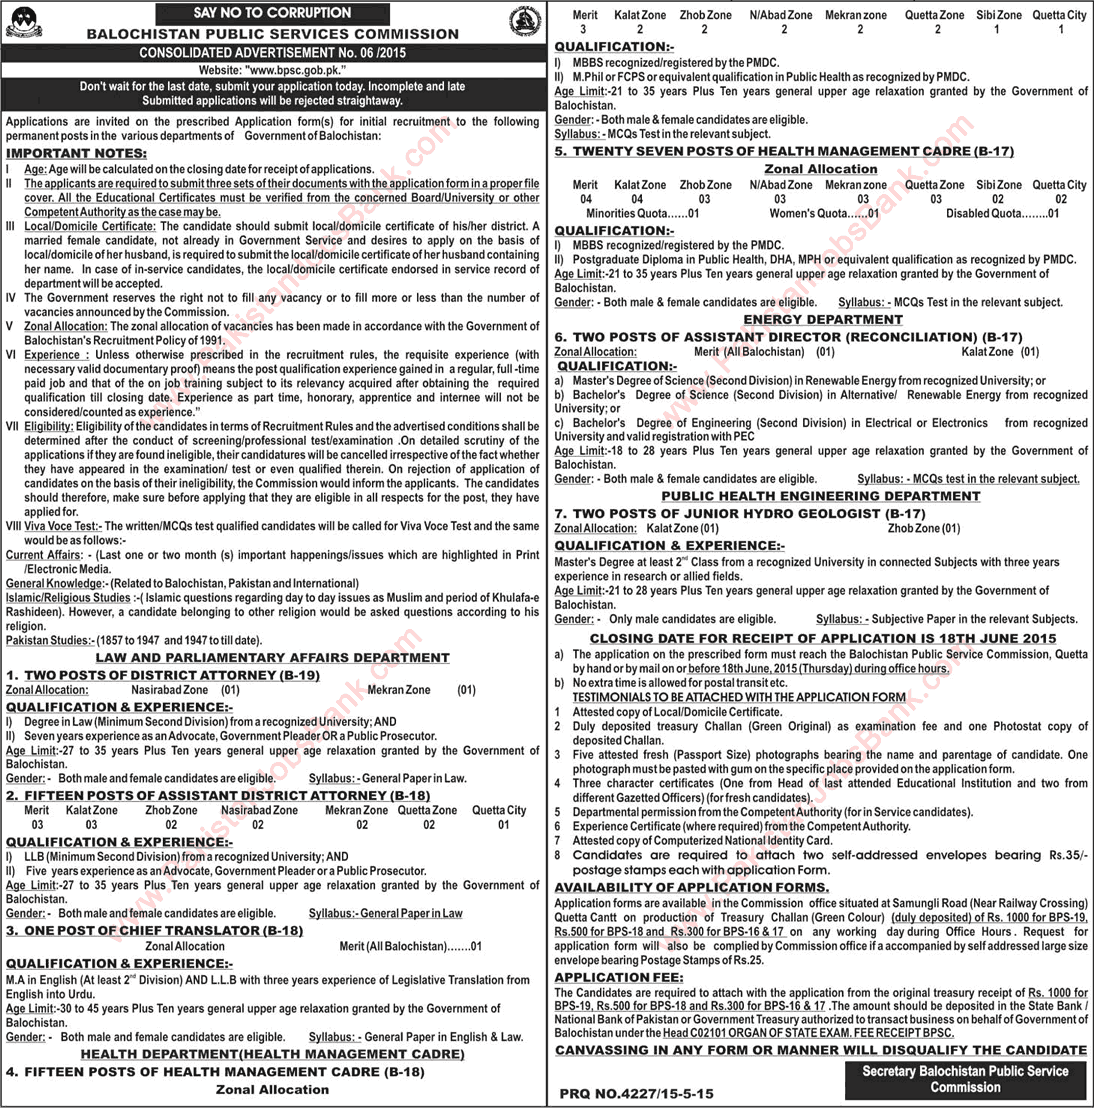 BPSC Jobs May 2015 Health Management Cadre, Assistant / District Attorney & Others Latest